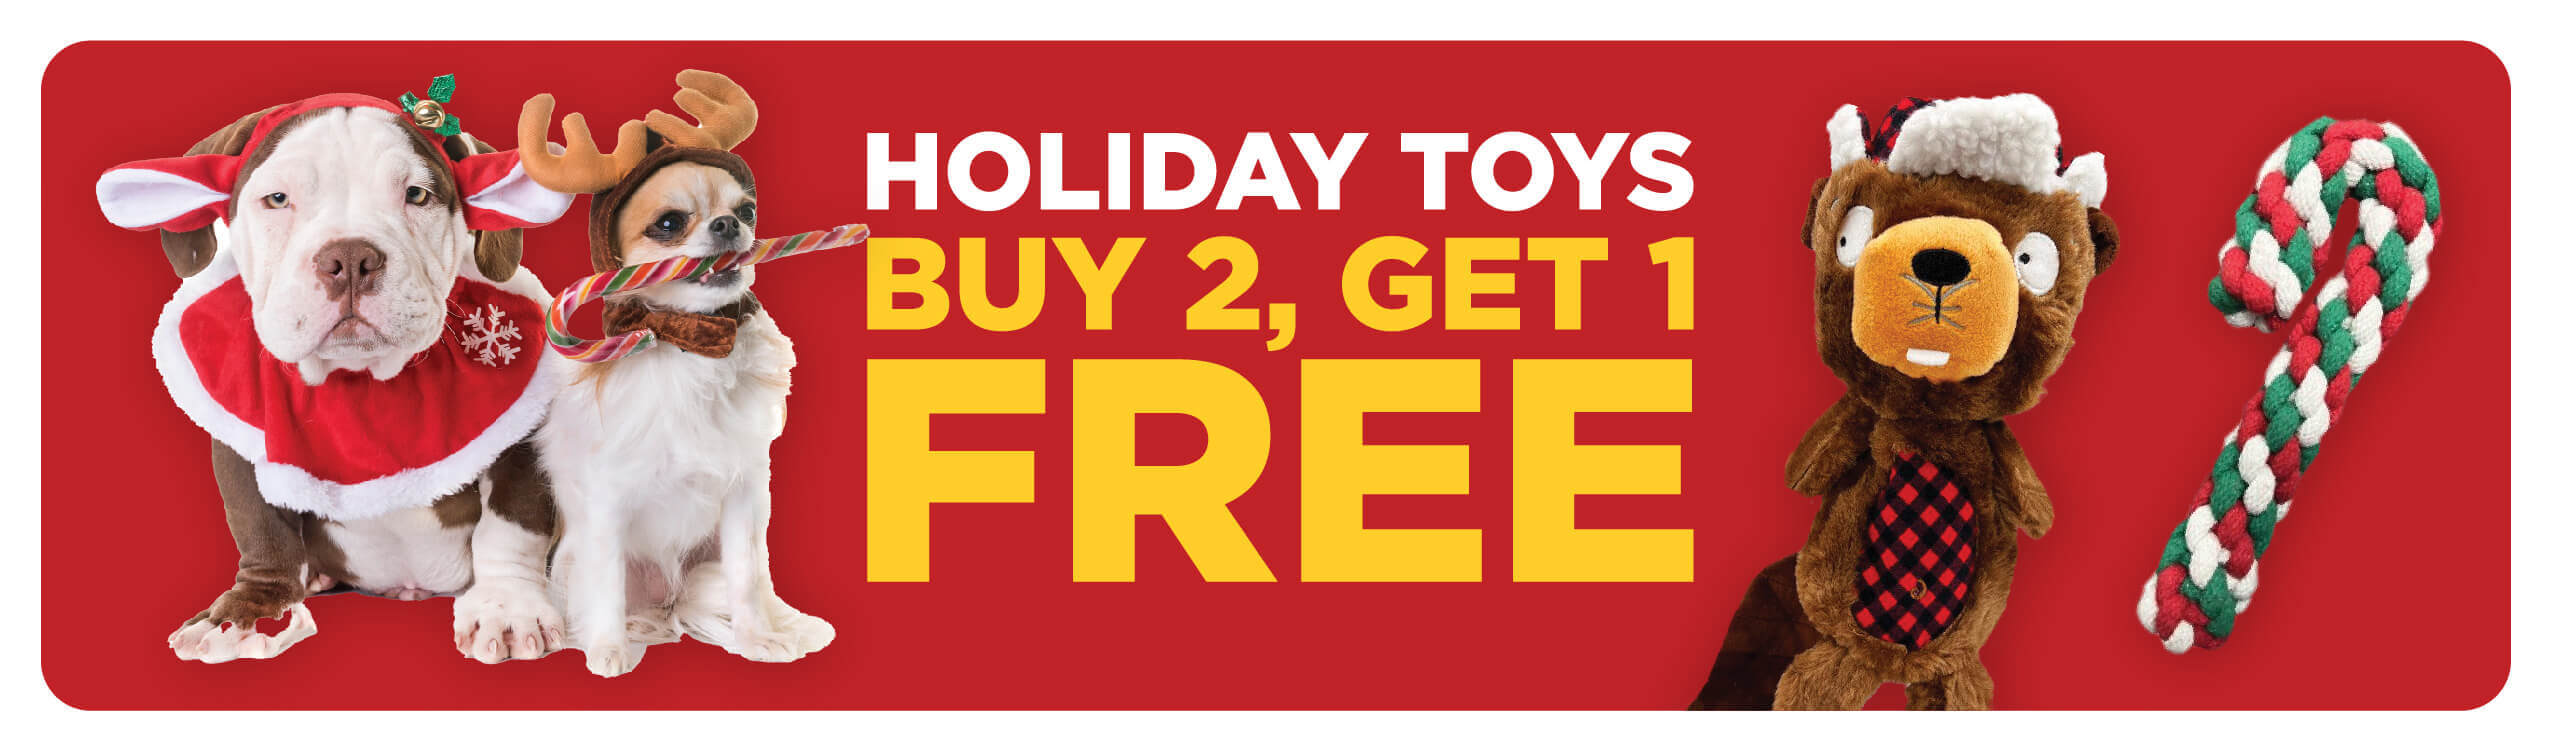 Buy 2 Get 1 Free Holiday Toys